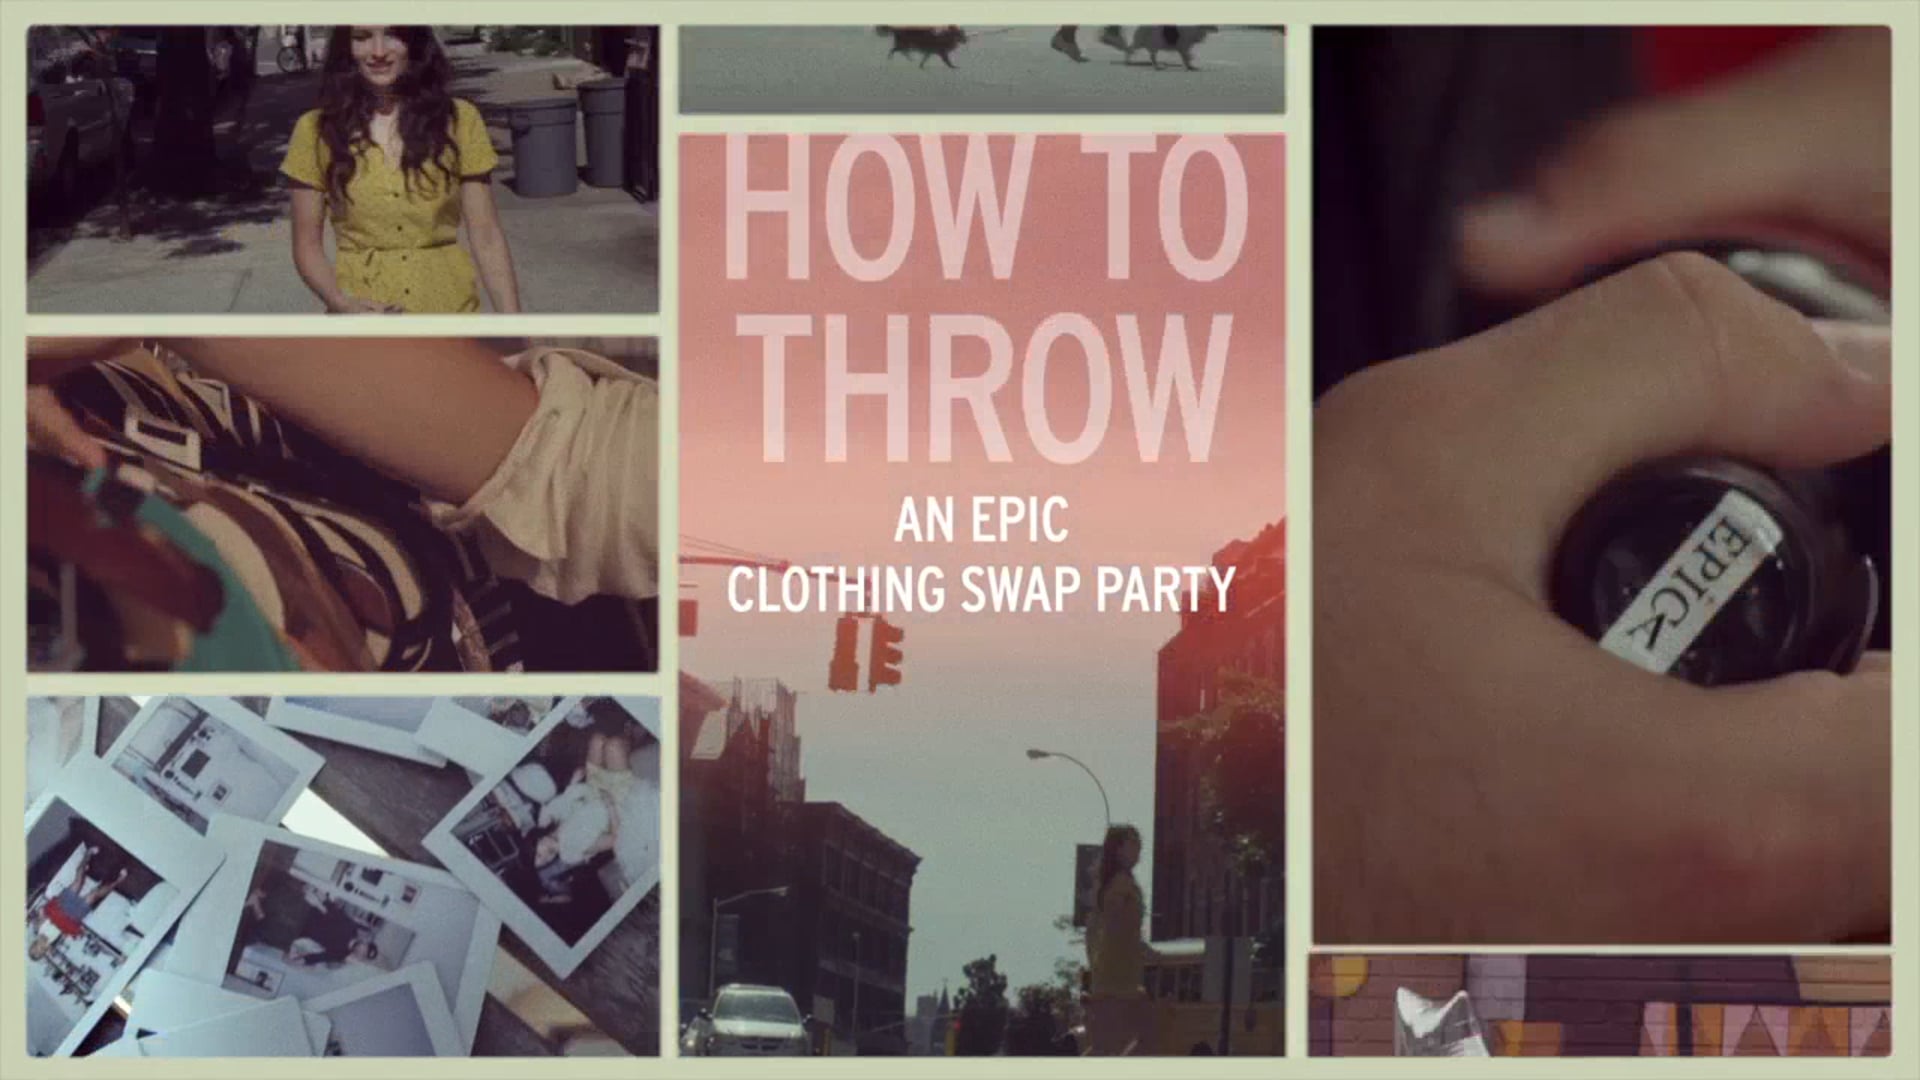 How to throw an epic clothing swap party